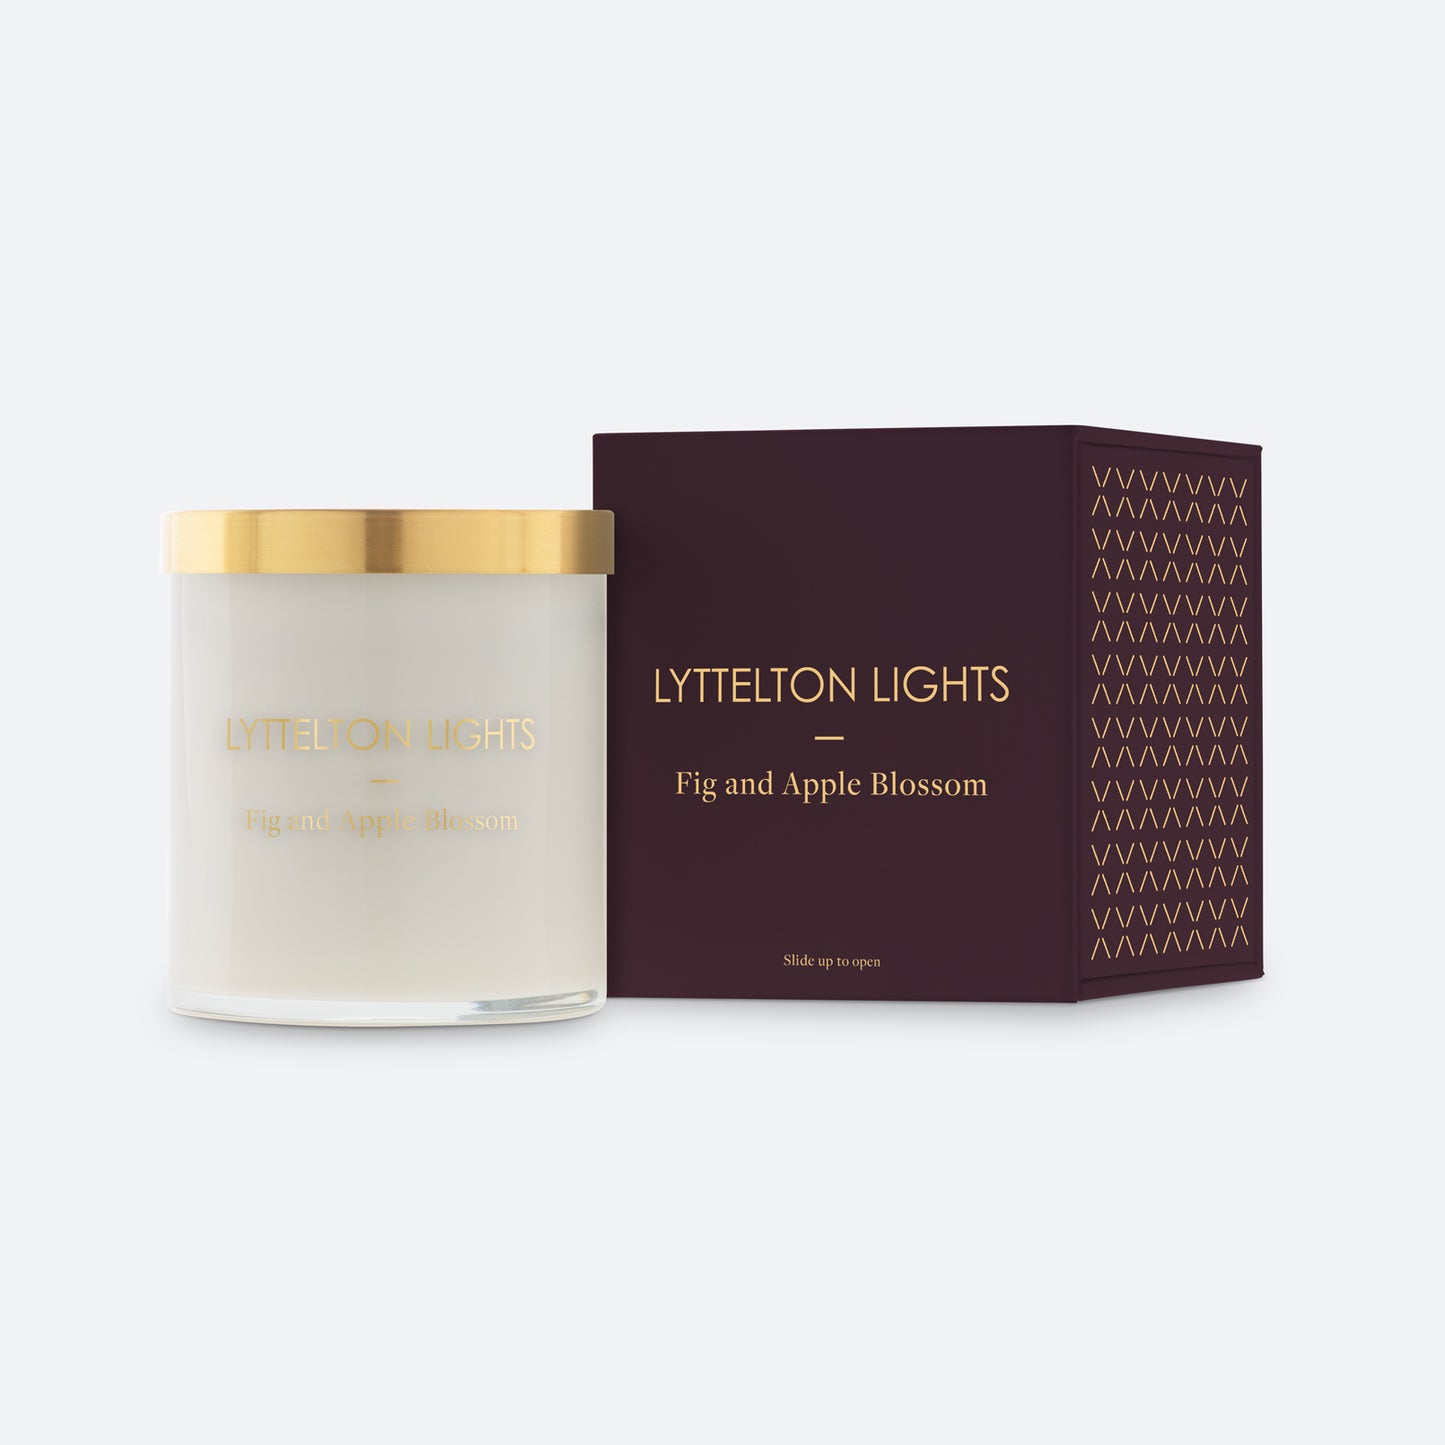 Fig & Apple Blossom Candle by Lyttelton lights